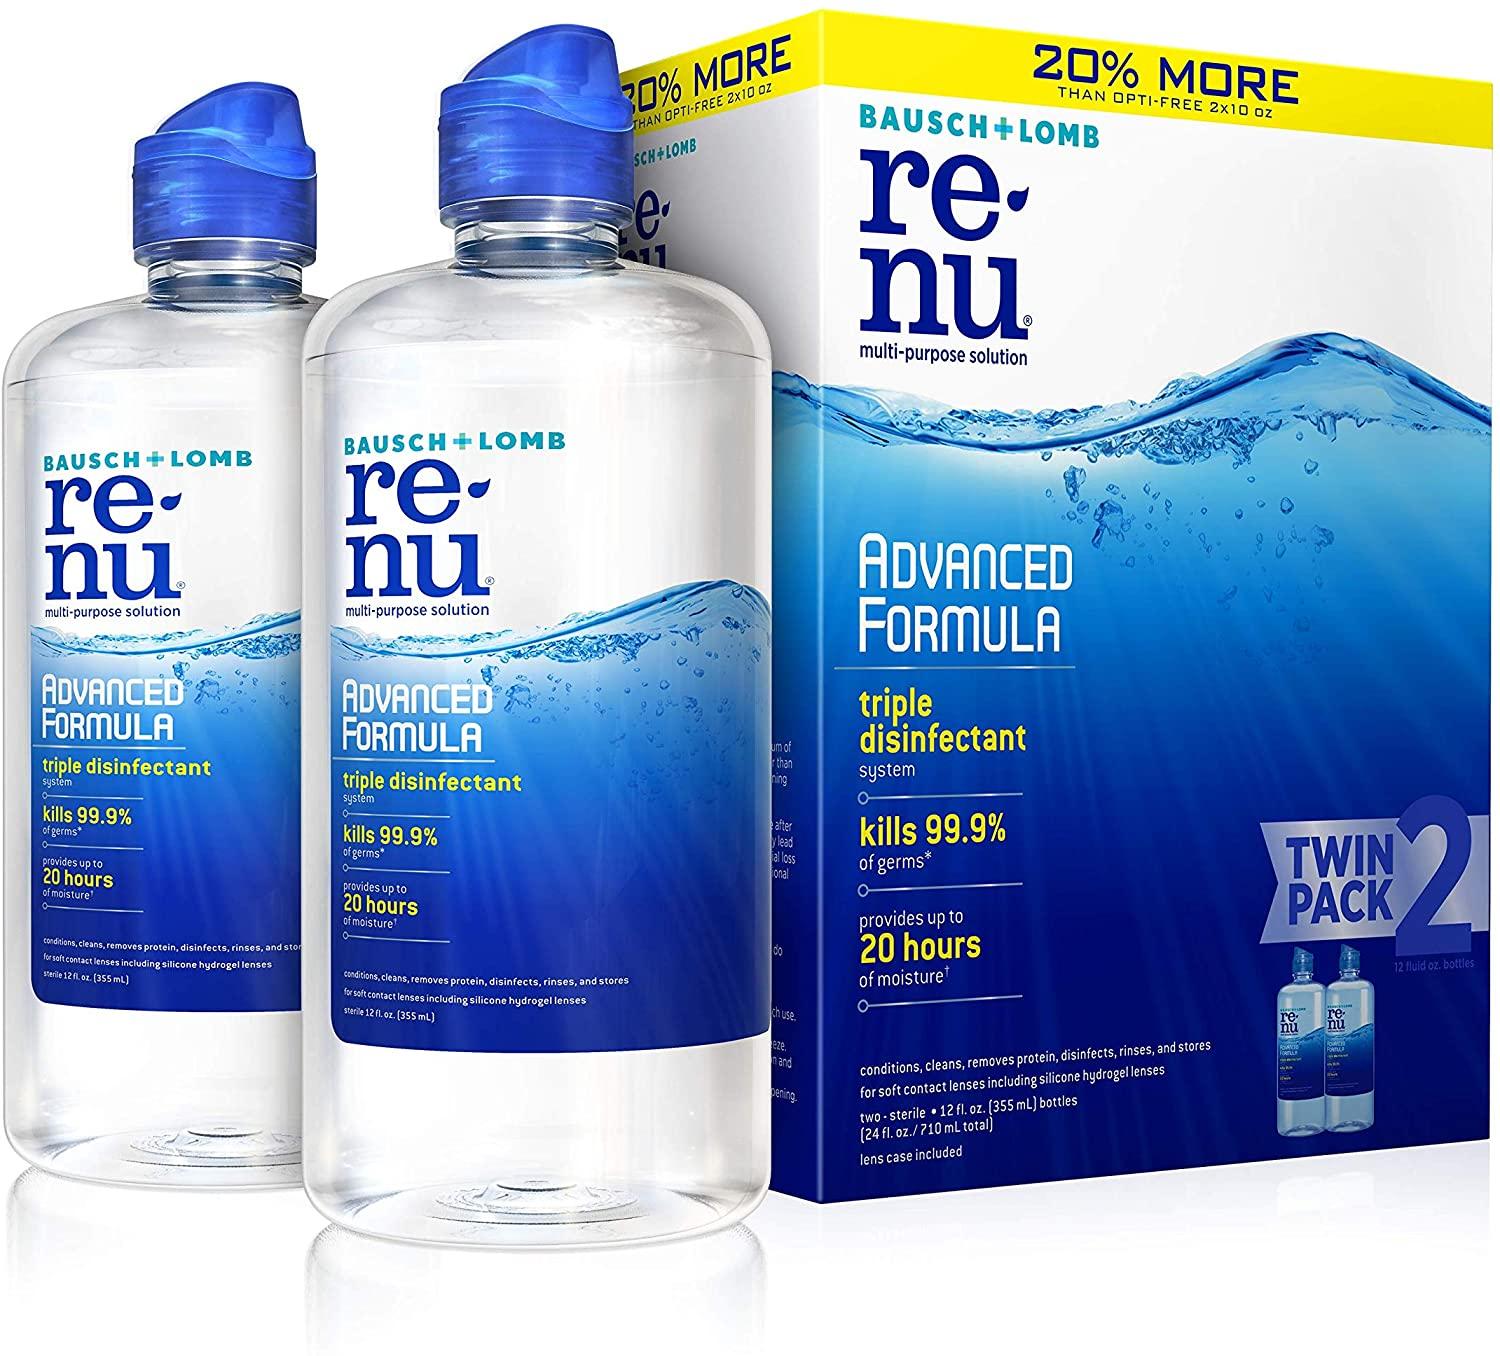 2-Pack 12oz Bausch + Lomb ReNu Contact Lens Solution for $7.27 Shipped